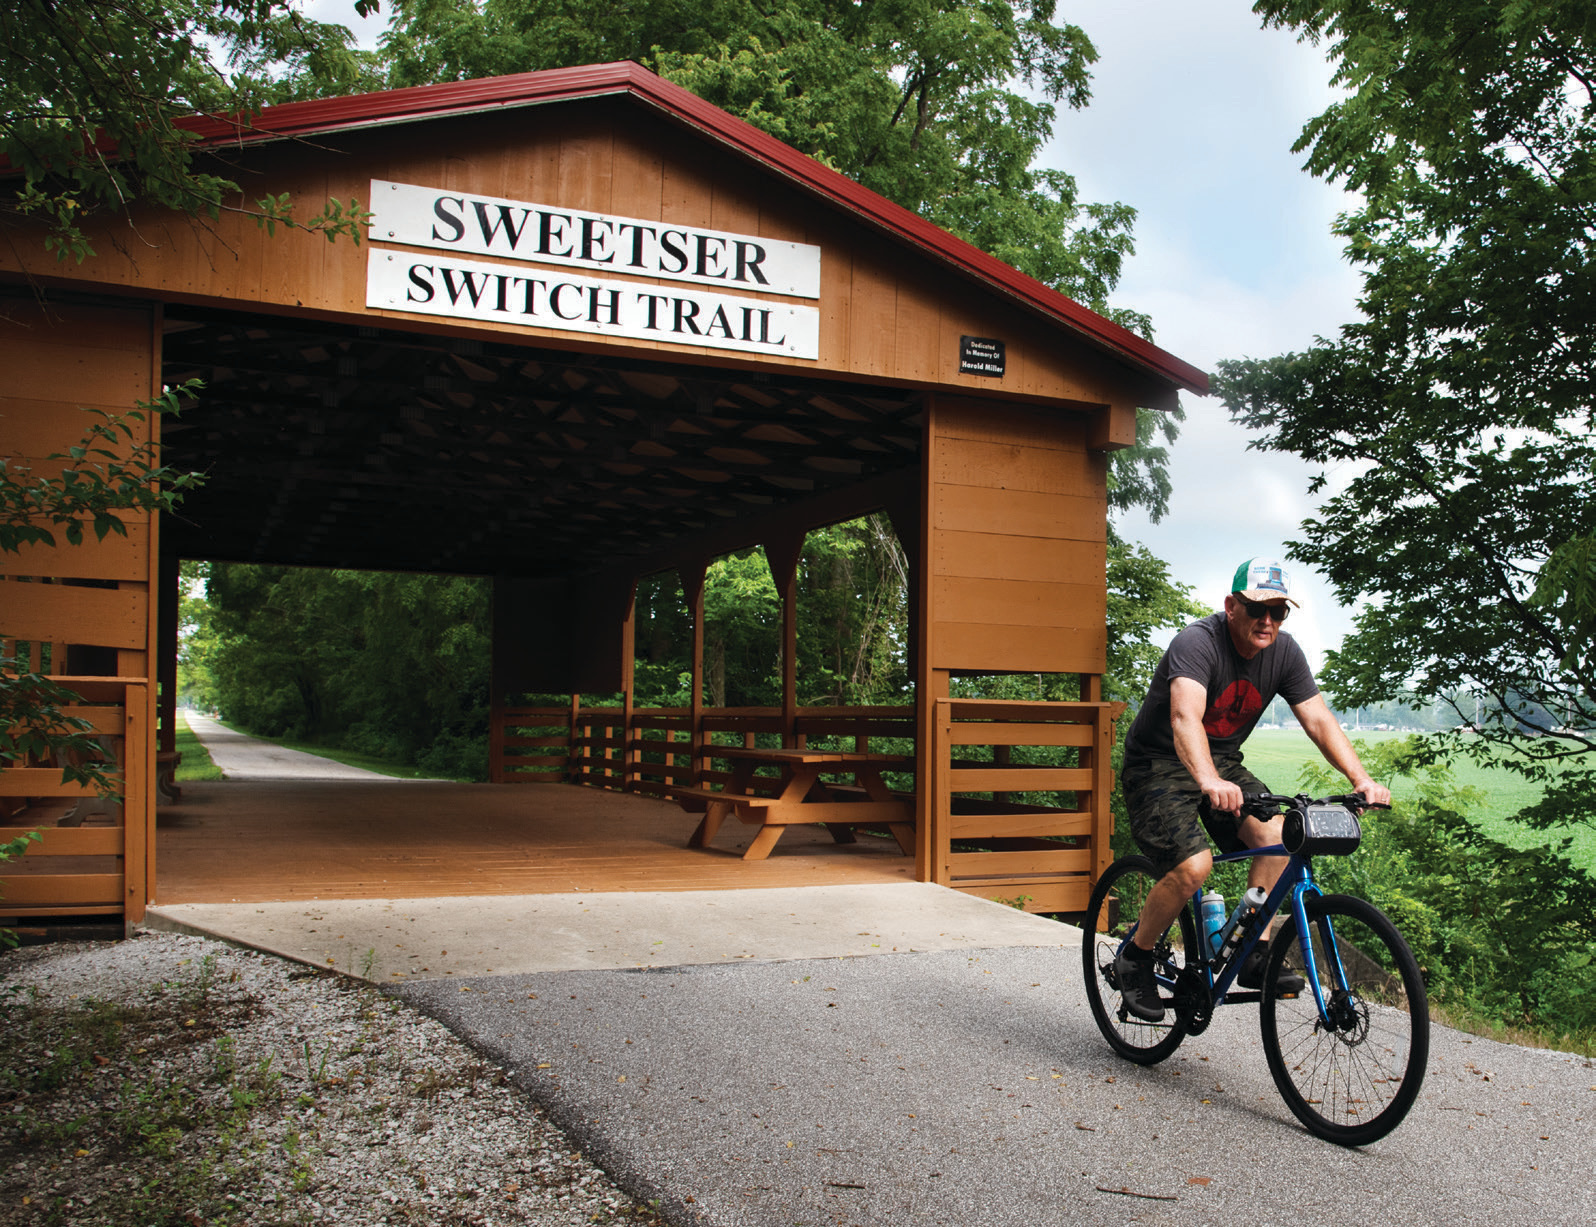 Sweetser Switch Trail